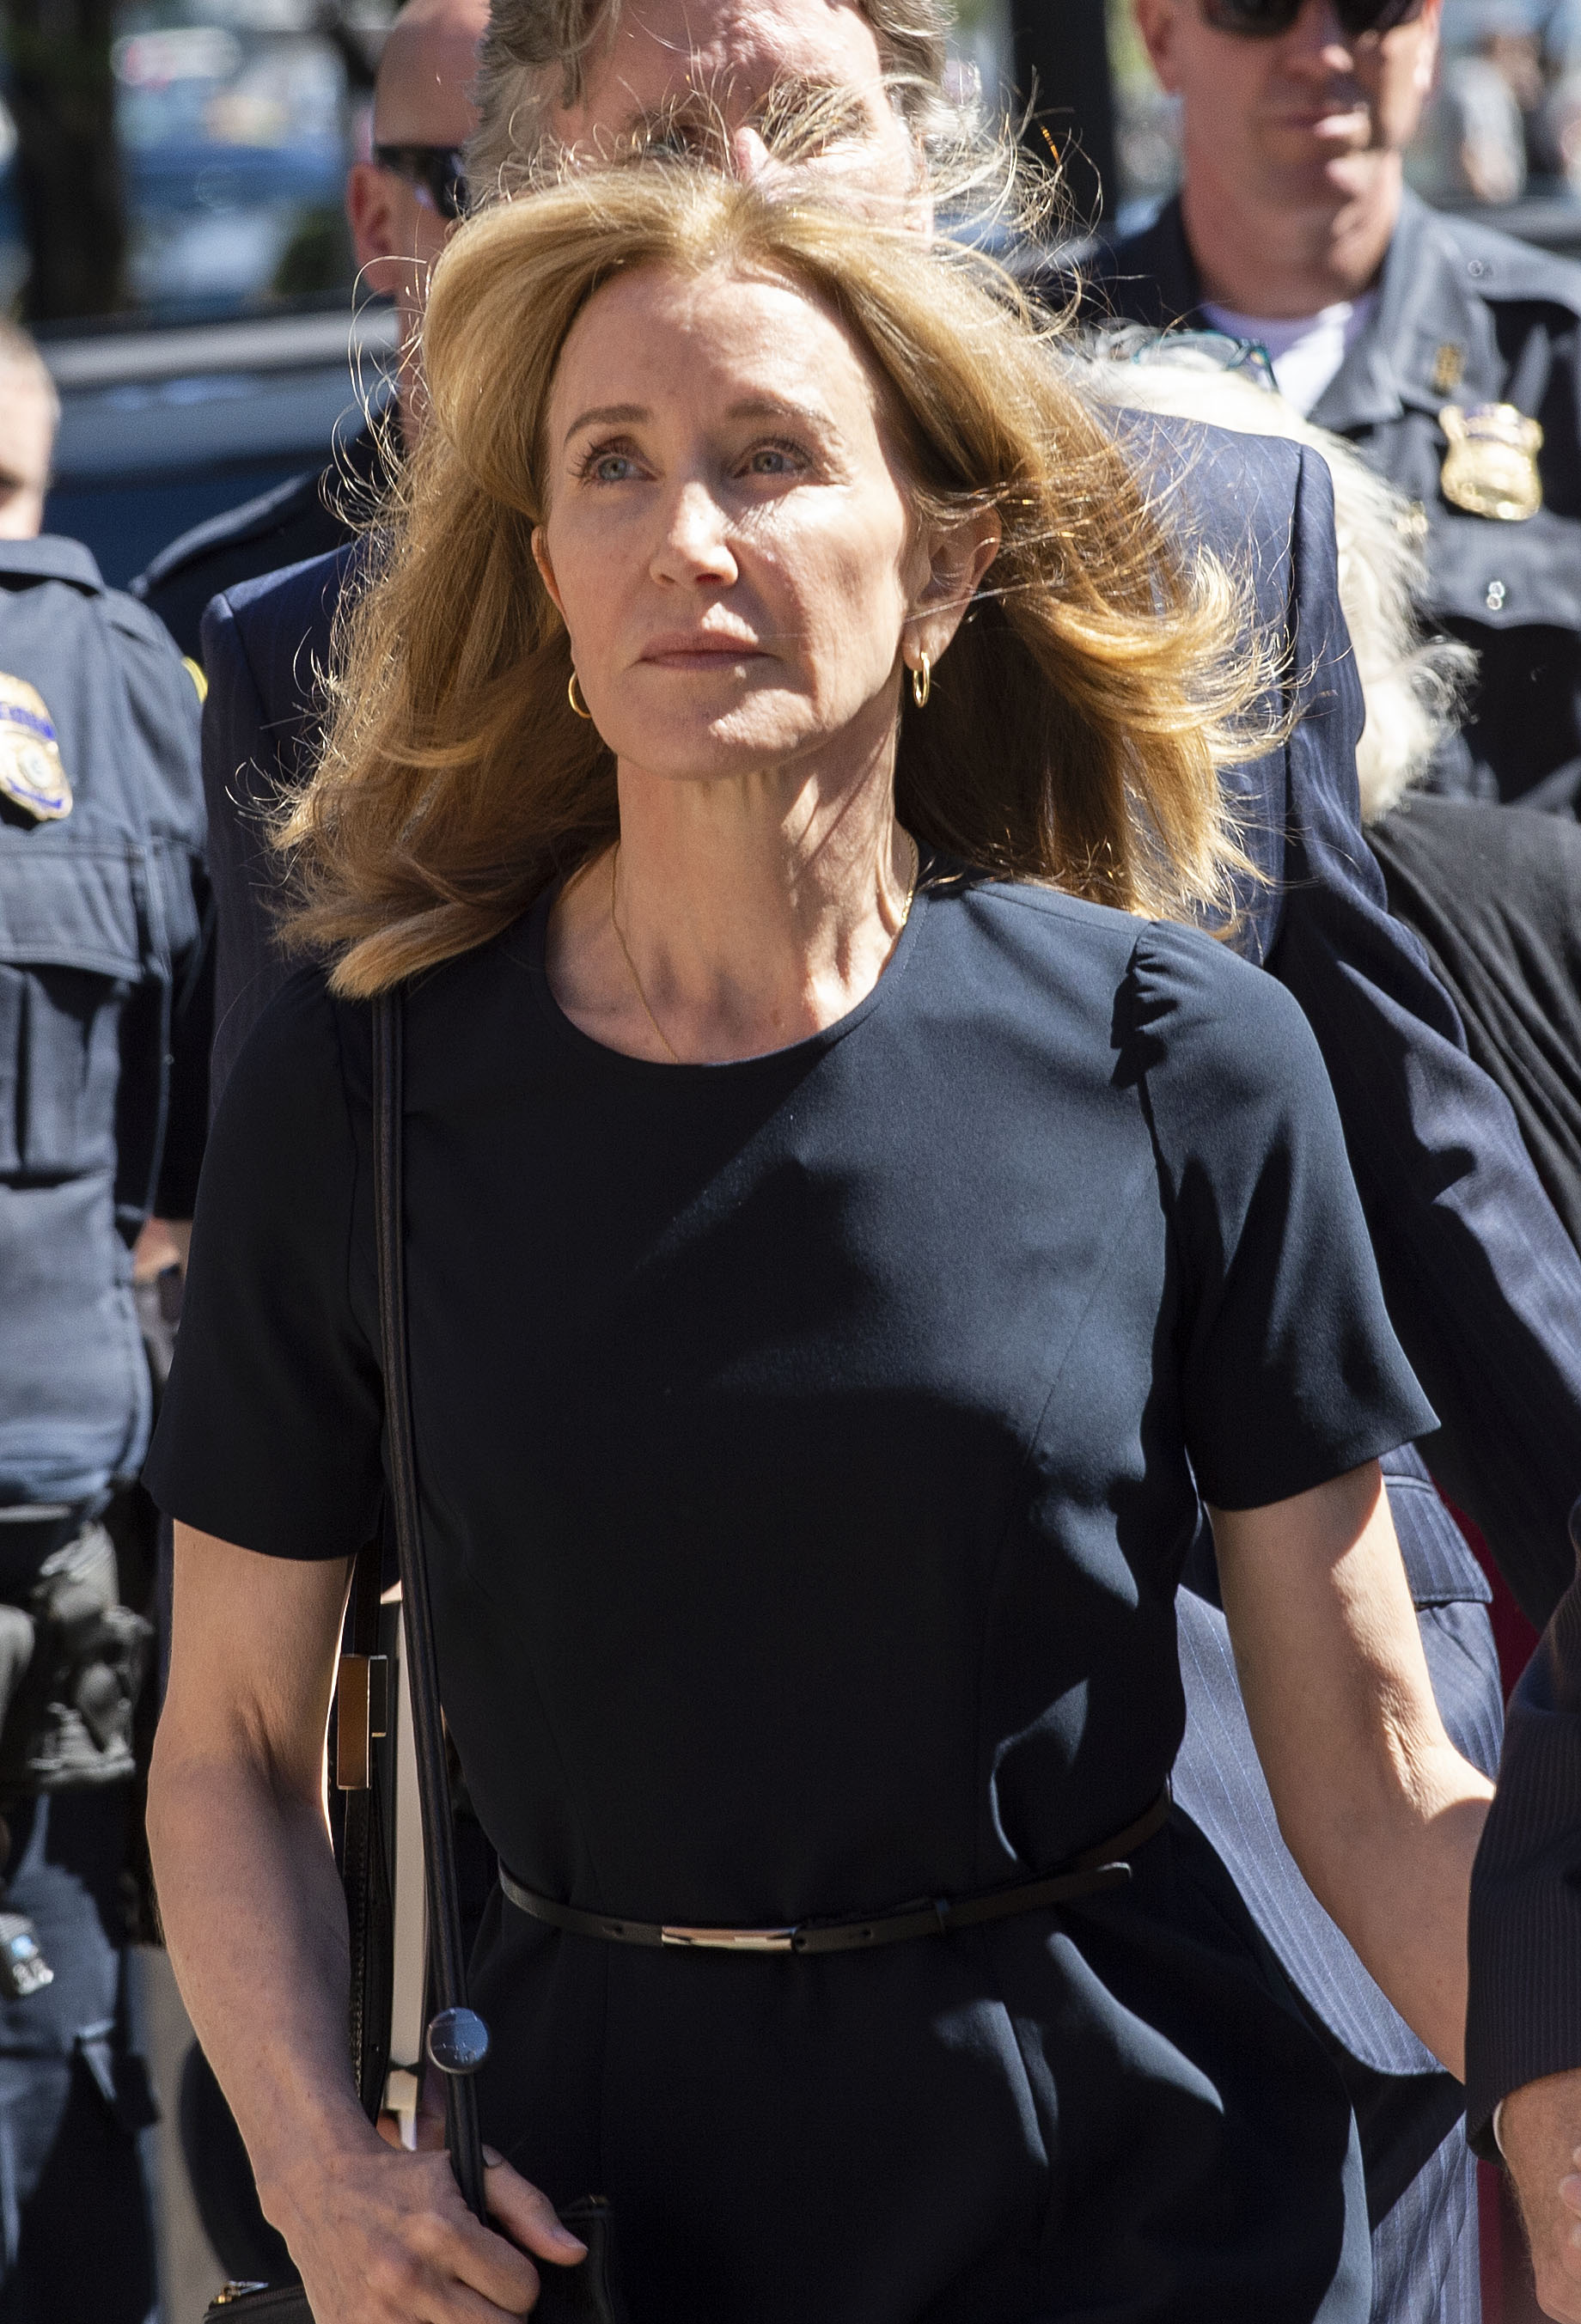 Felicity Huffman makes her way to the entrance of the John Joseph Moakley United States Courthouse on September 13, 2019 in Boston. | Source: Getty Images